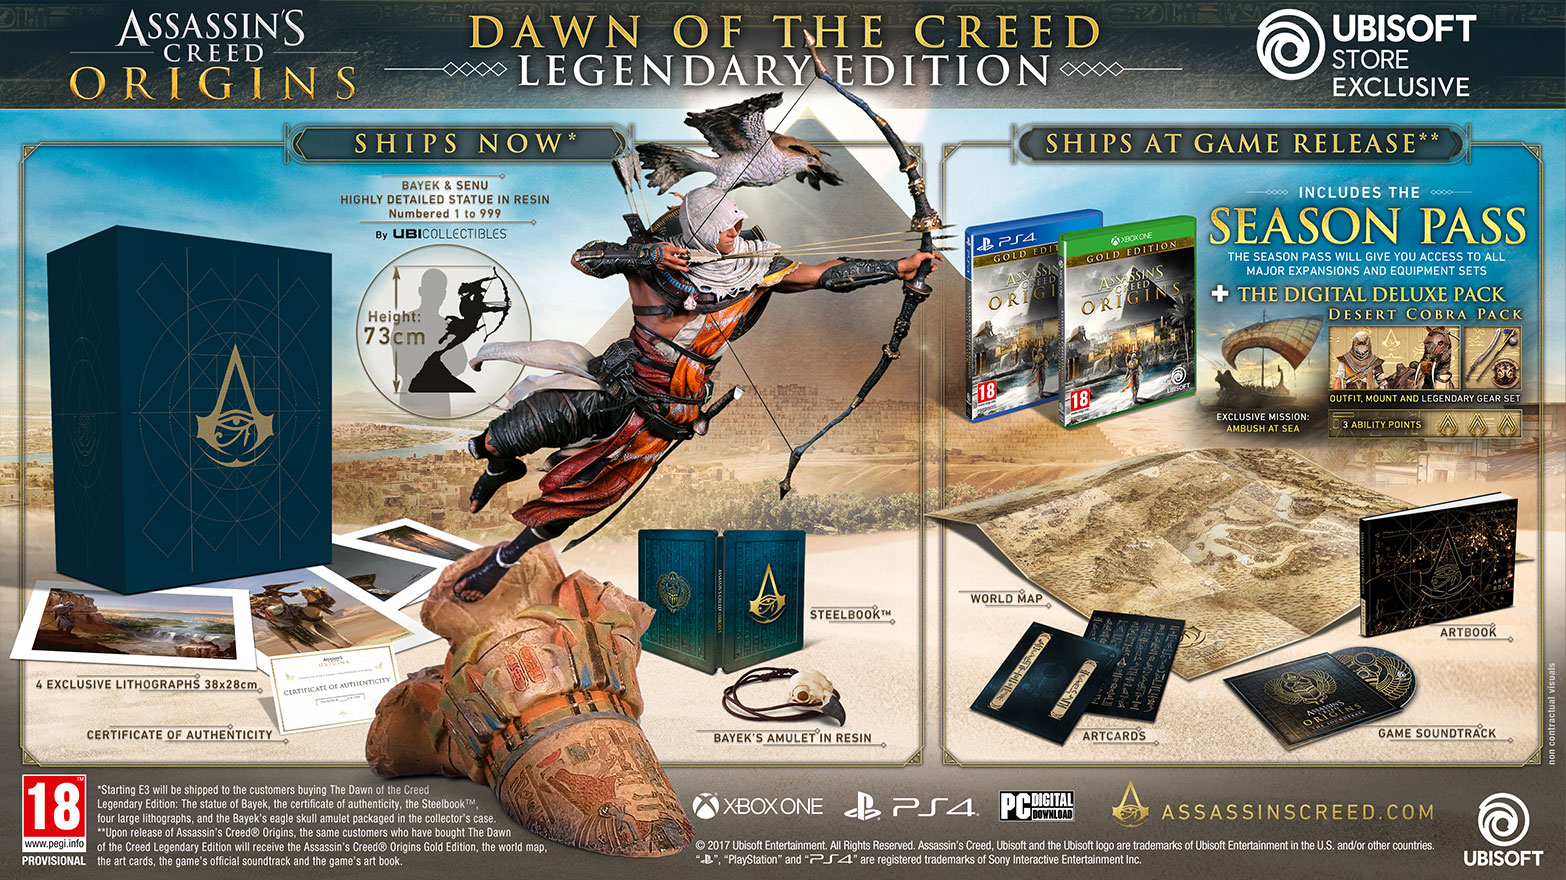 Assassin's Creed Origins Dawn of the Creed Legendary Edition